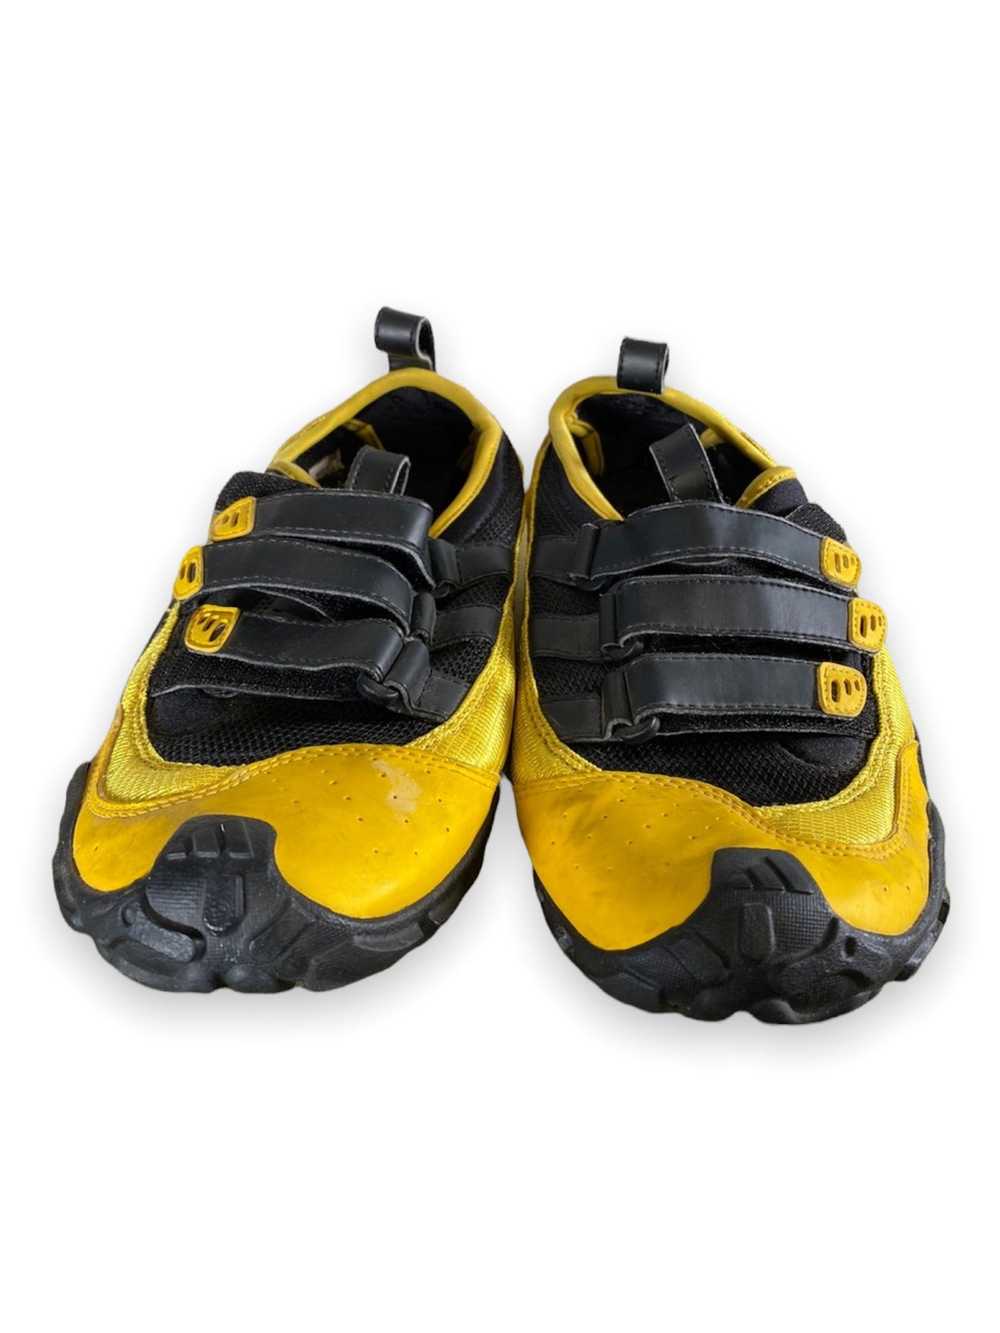 Vintage Velcro Water Shoes - image 1